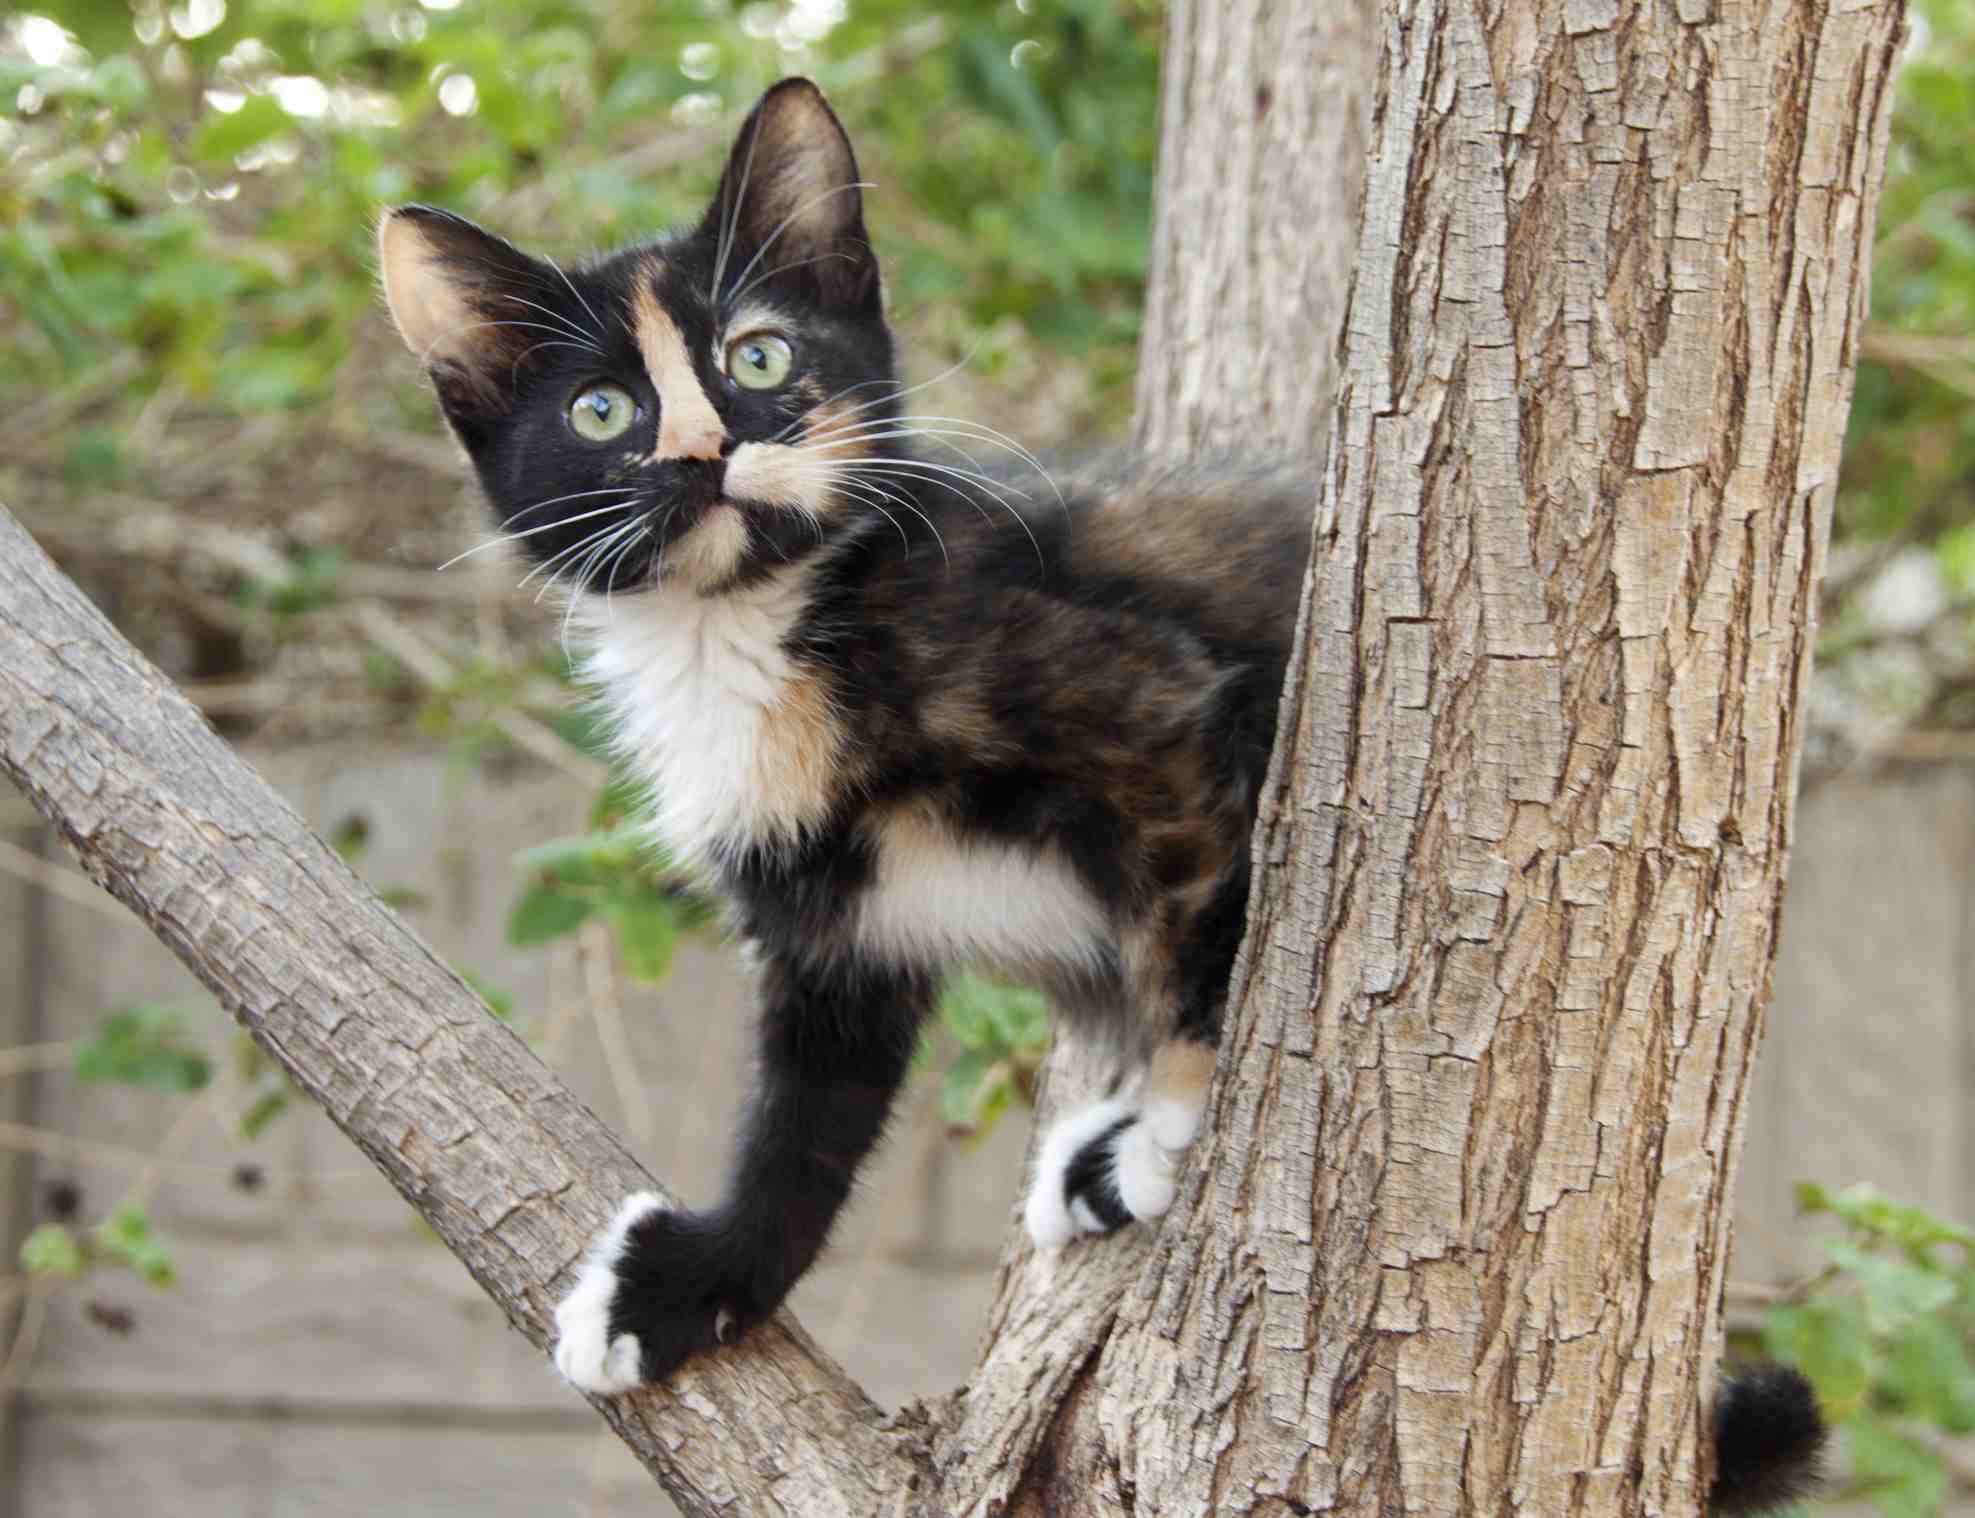 A calico cat in a tree